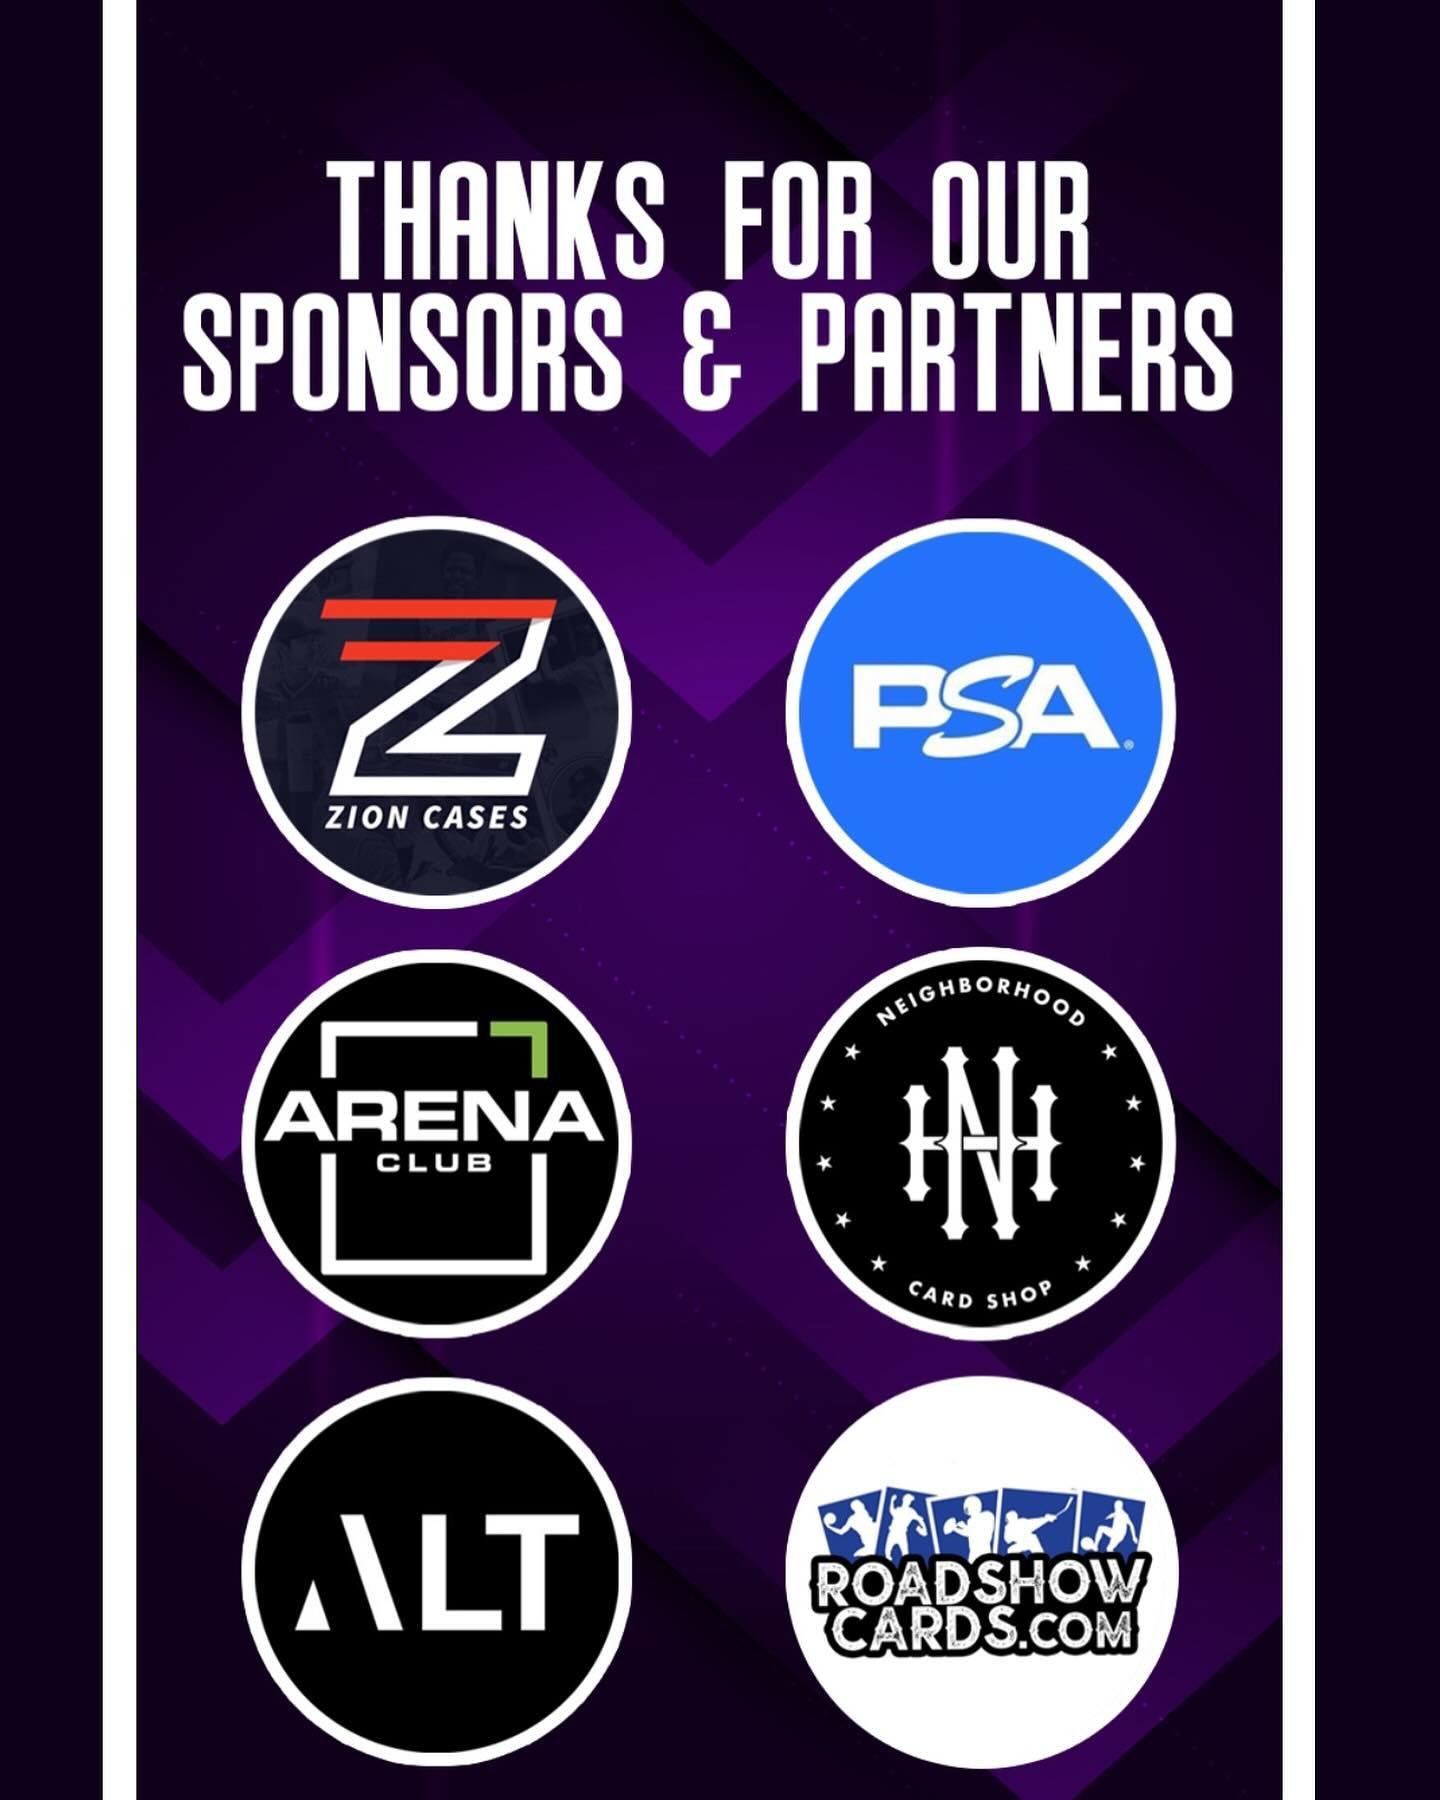 We just want to thank our partners and sponsors for supporting us on our first inaugural card show. We appreciate every single one of you and all our followers who are attending! @arenaclub @neighborhoodcardshop @psacard @zioncasesco @altxyzofficial 